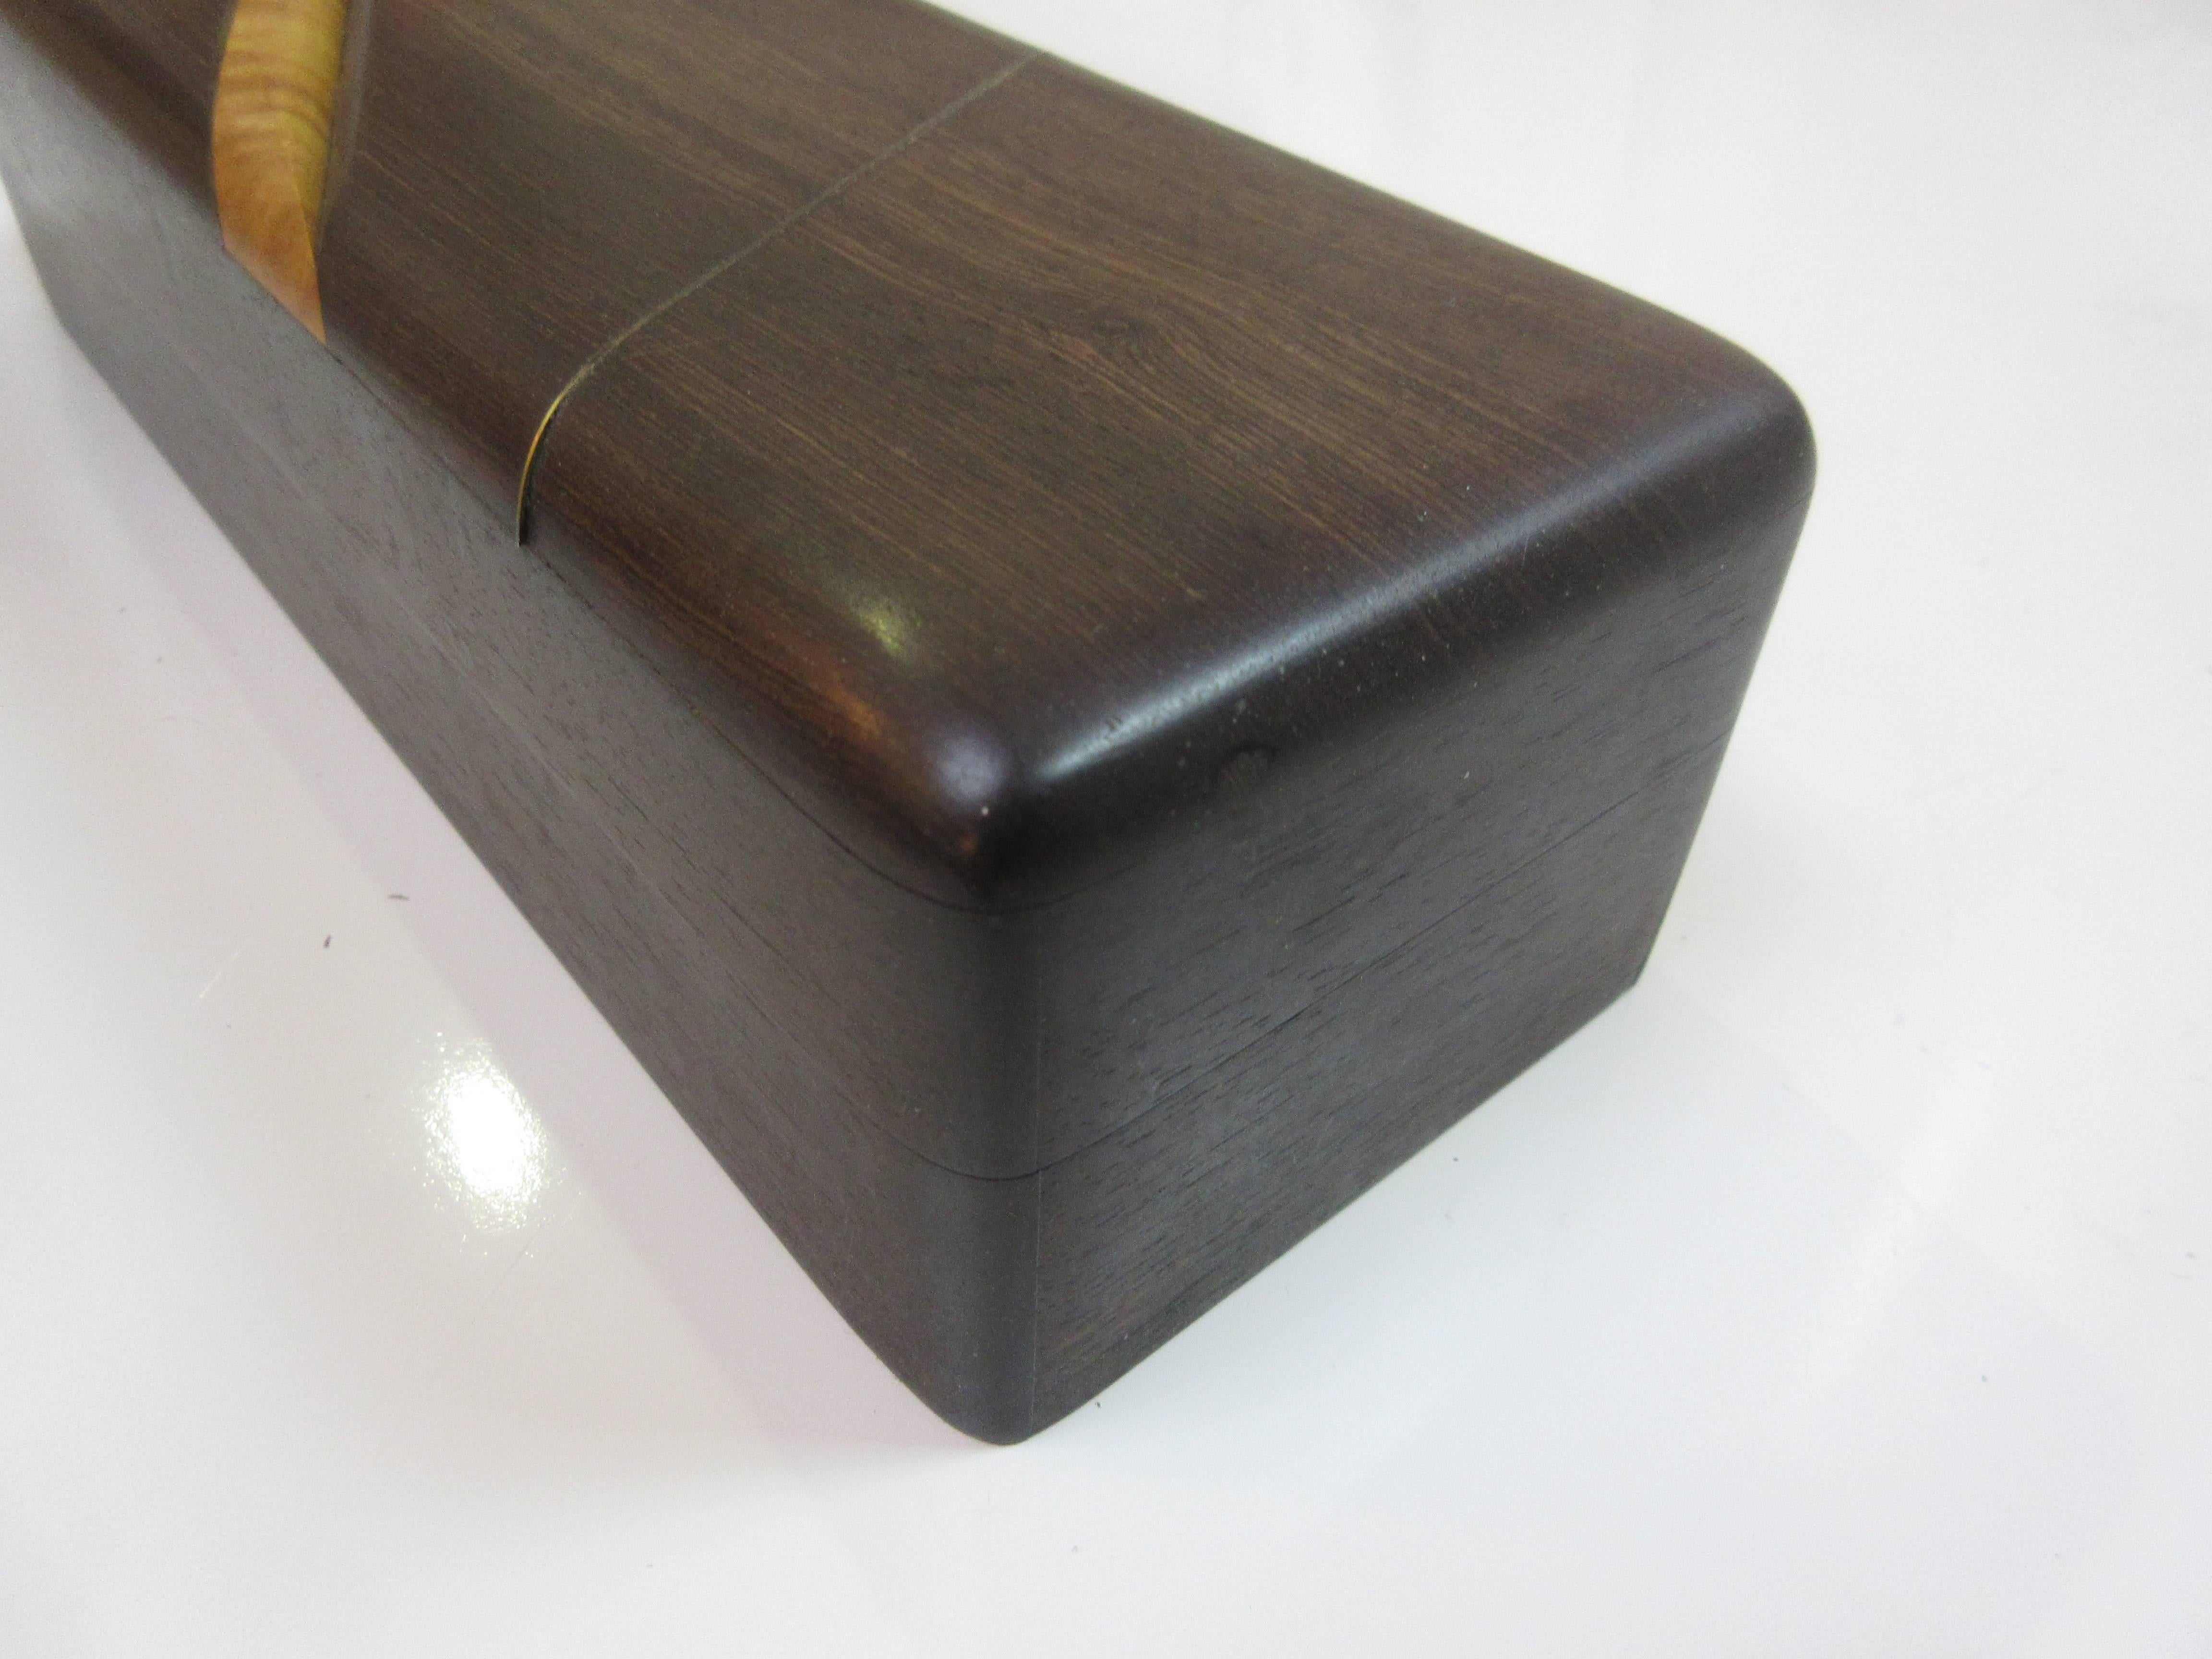 East Indian ebony, curly maple and brass hinged box by David and Kim Okrant from the mid-1980s from Boulder Creek California.